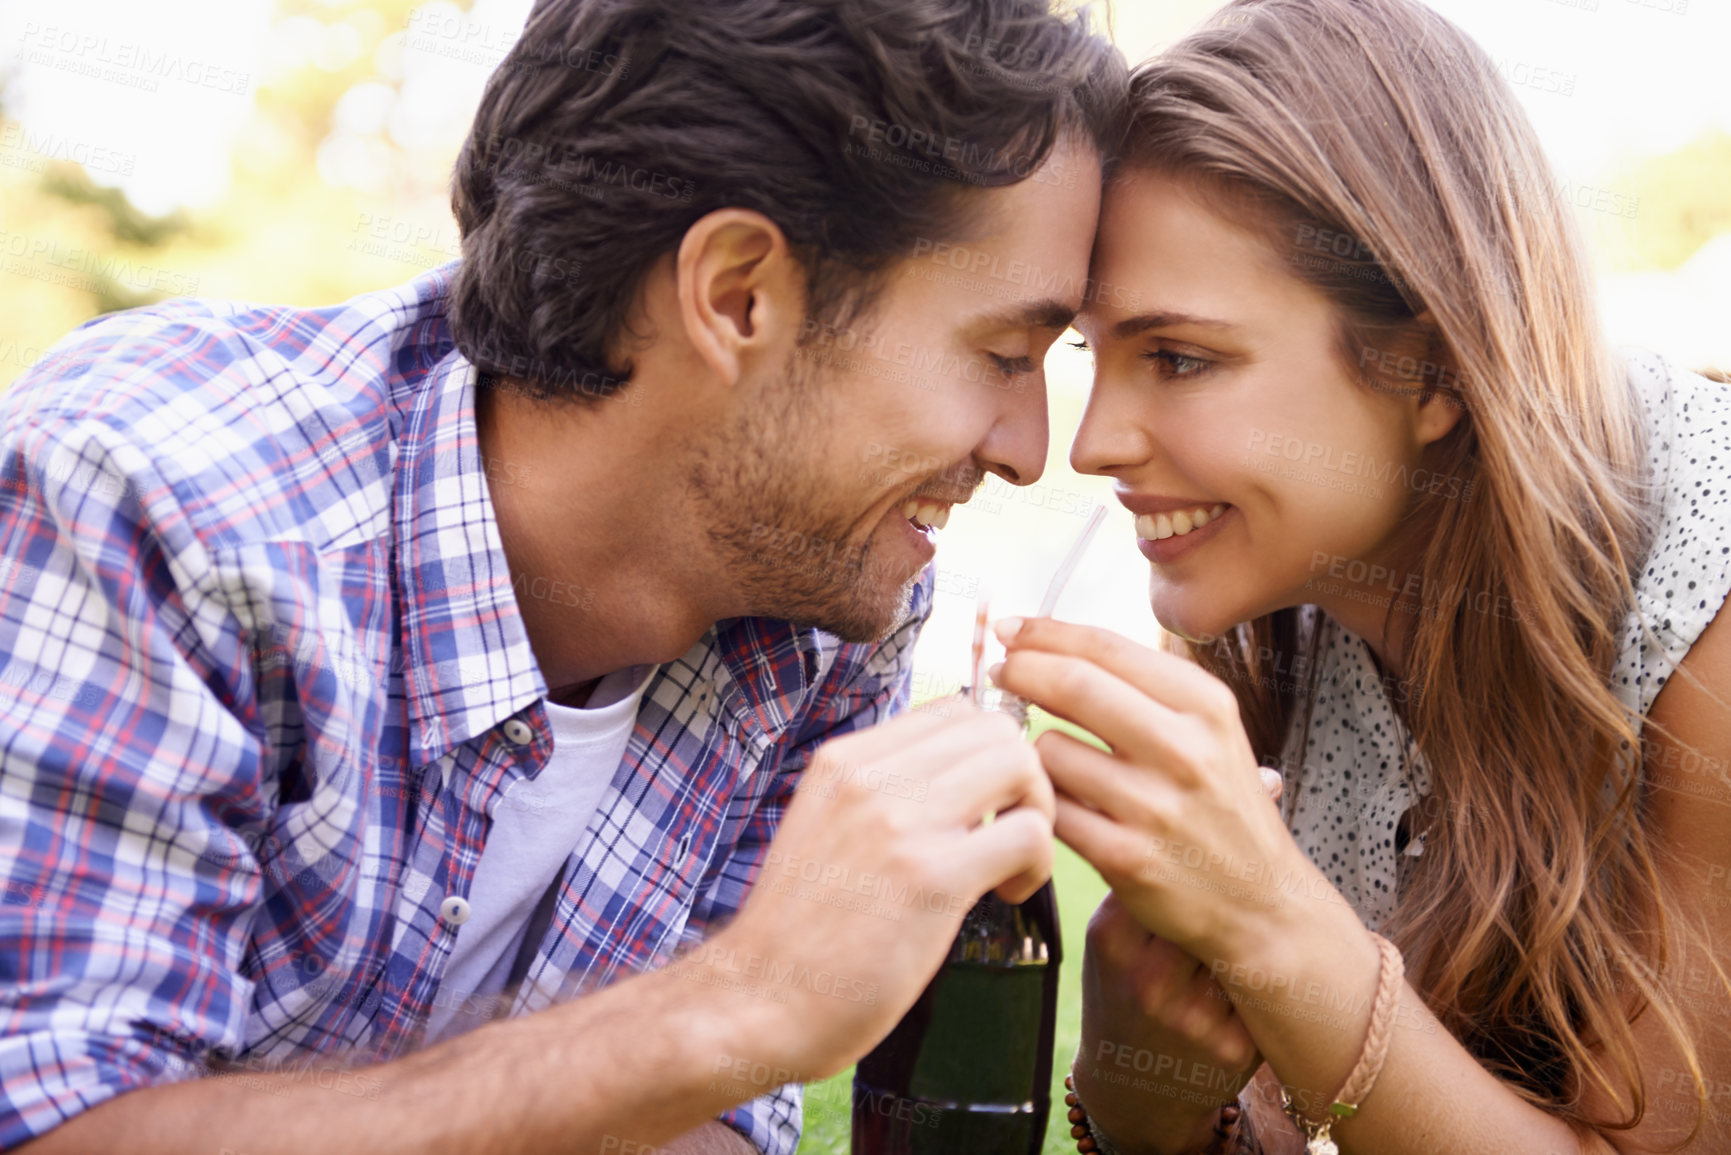 Buy stock photo Nature, happy and couple sharing a drink with love on a summer picnic date in an outdoor garden. Happiness, smile and young man and woman drinking a bottle of cola together relaxing on grass in field